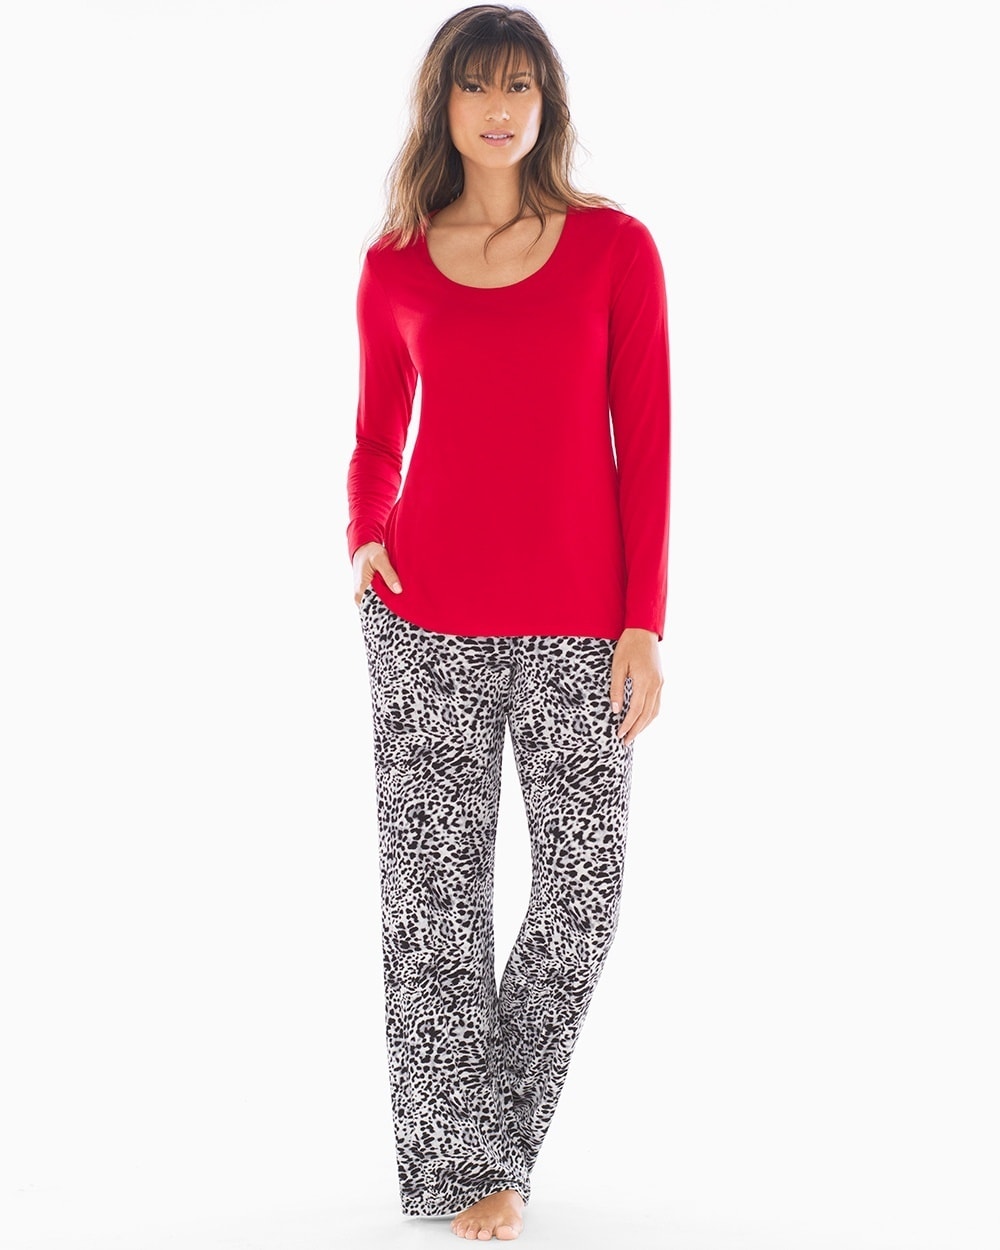 Cool Nights Scoopneck Long Sleeve Pajama Set Spotted Mini Festive Red